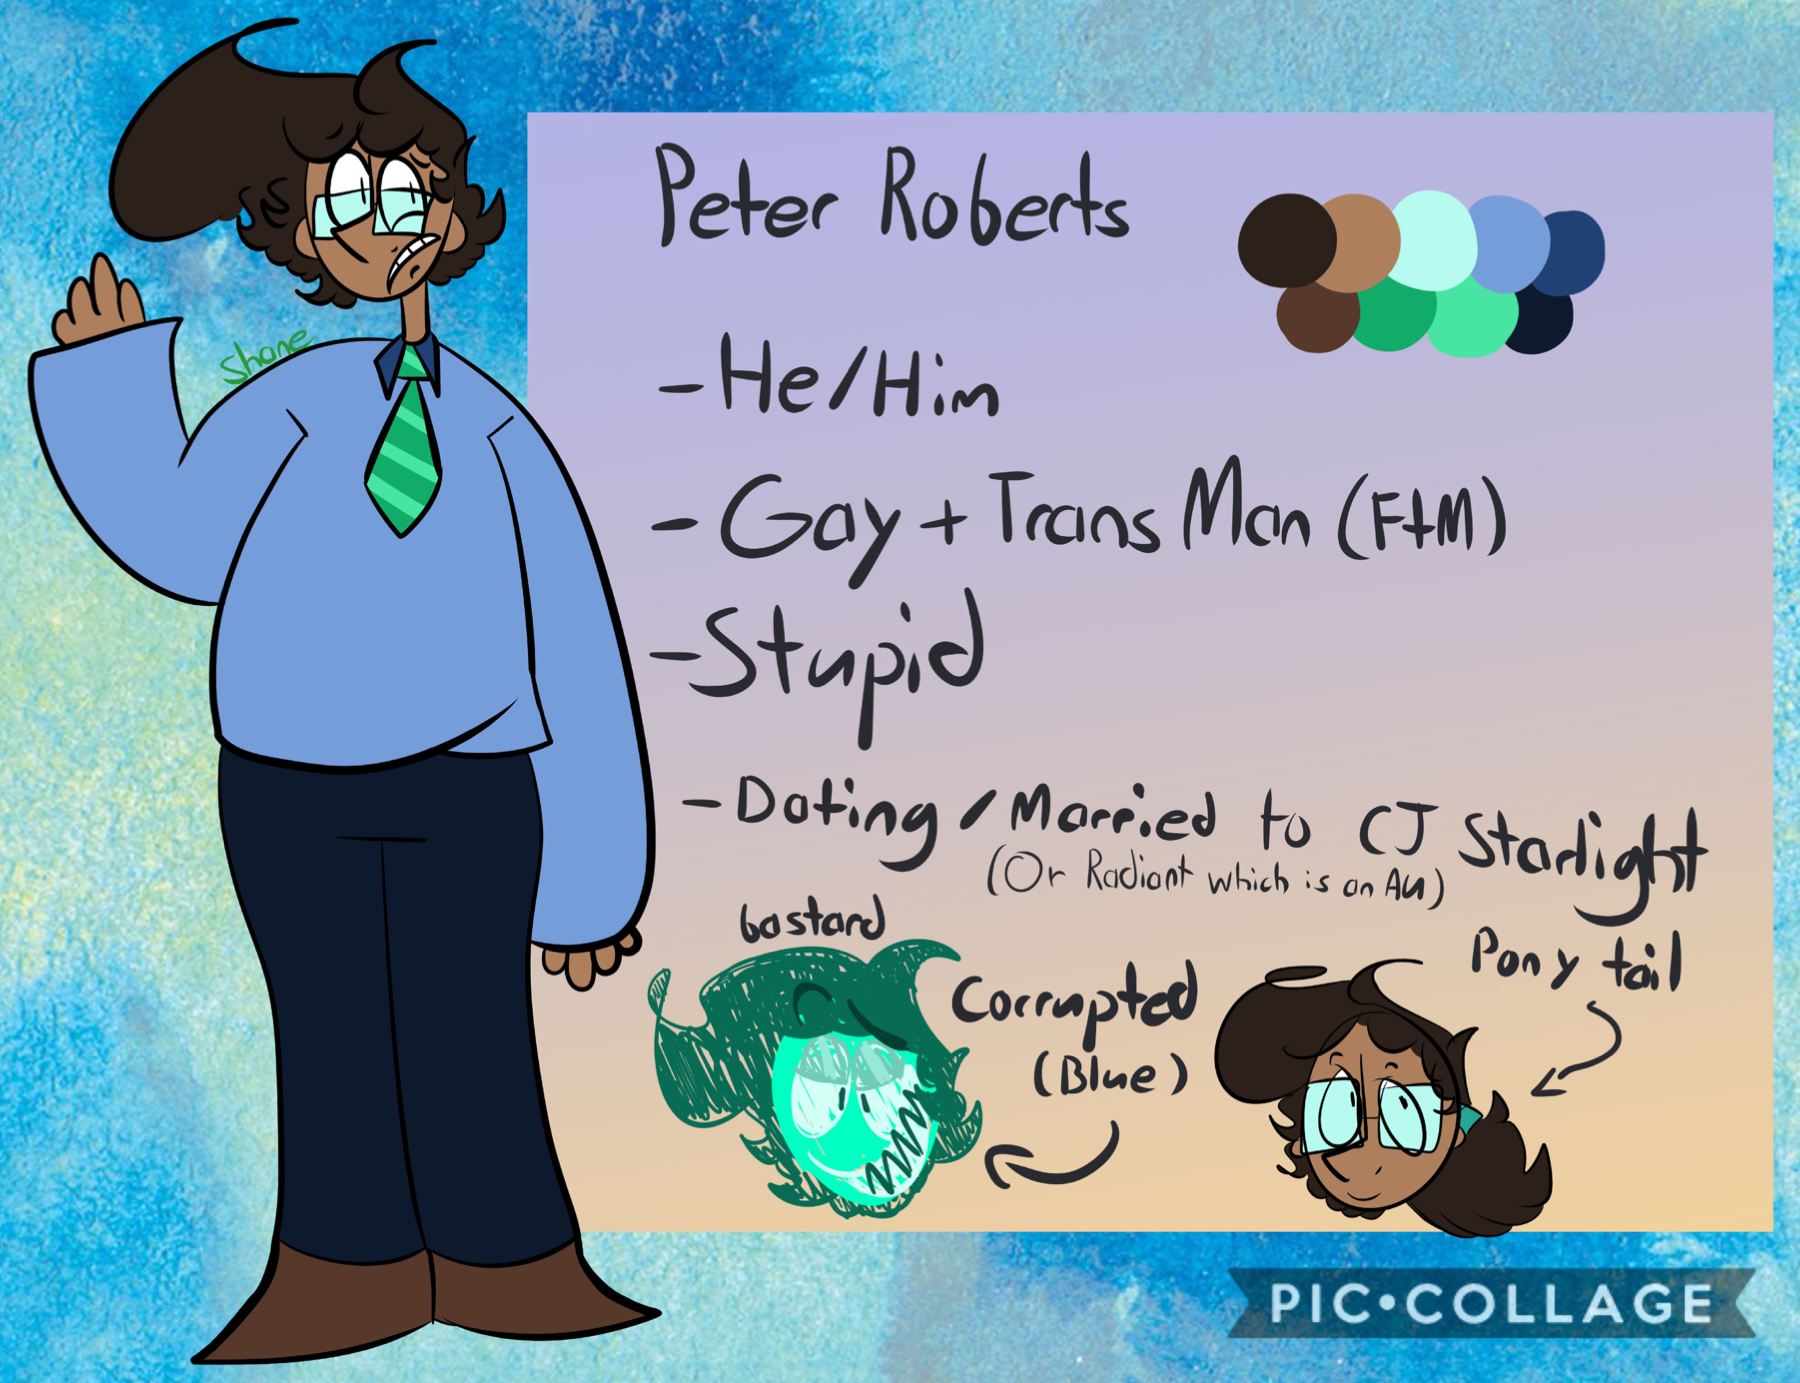 hello! im sorry for leaving again but im back. this is my first ever oc ref drawing yaaay